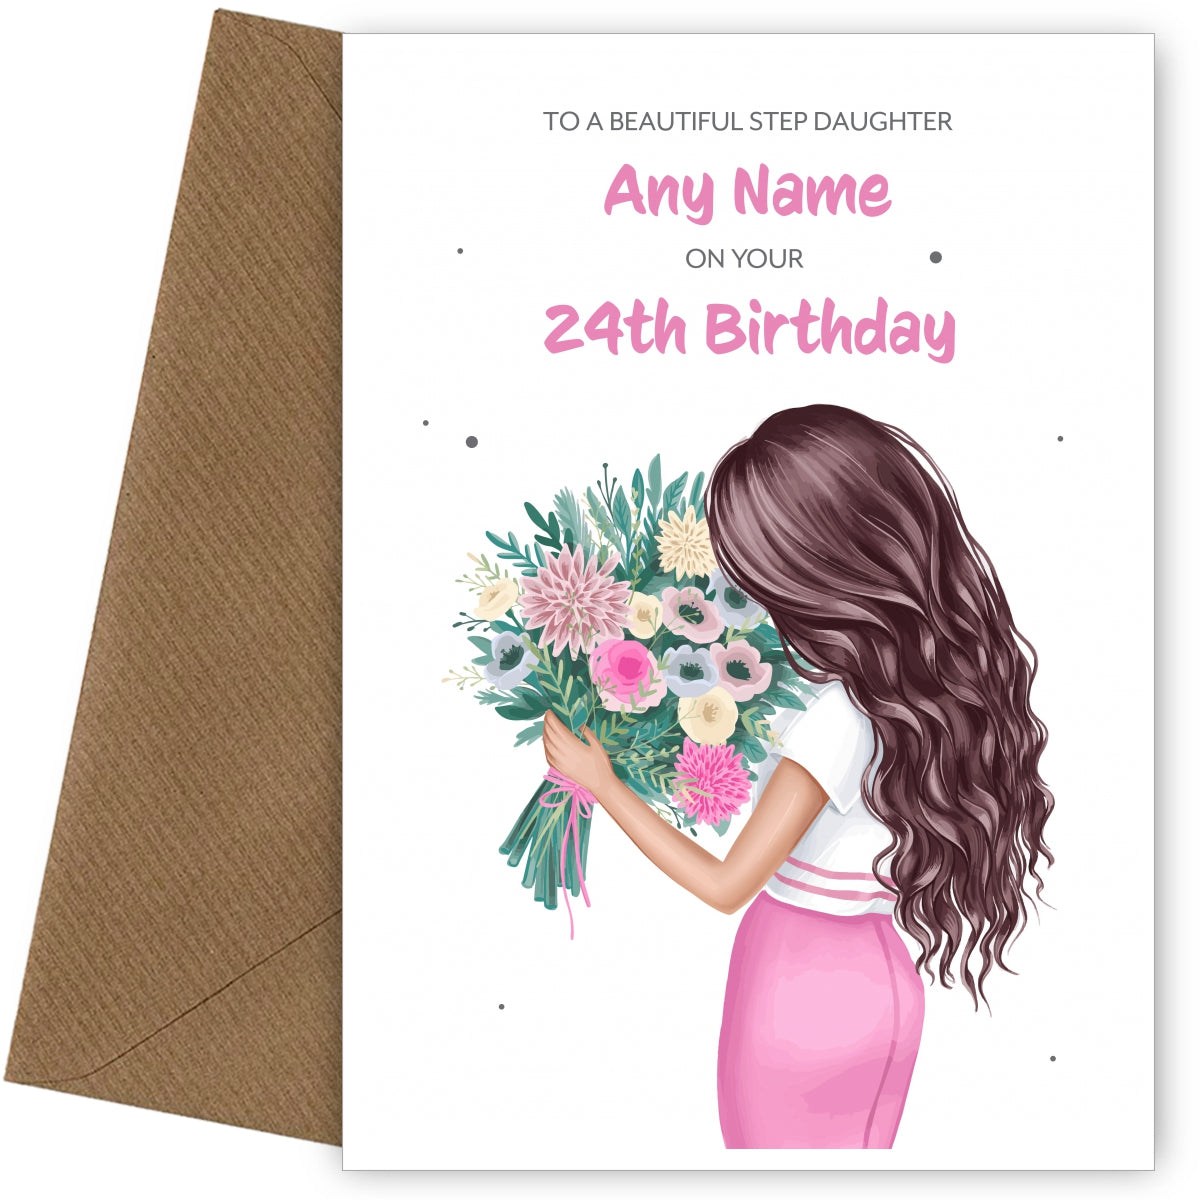 24th Birthday Card for Step Daughter - Beautiful Brunette